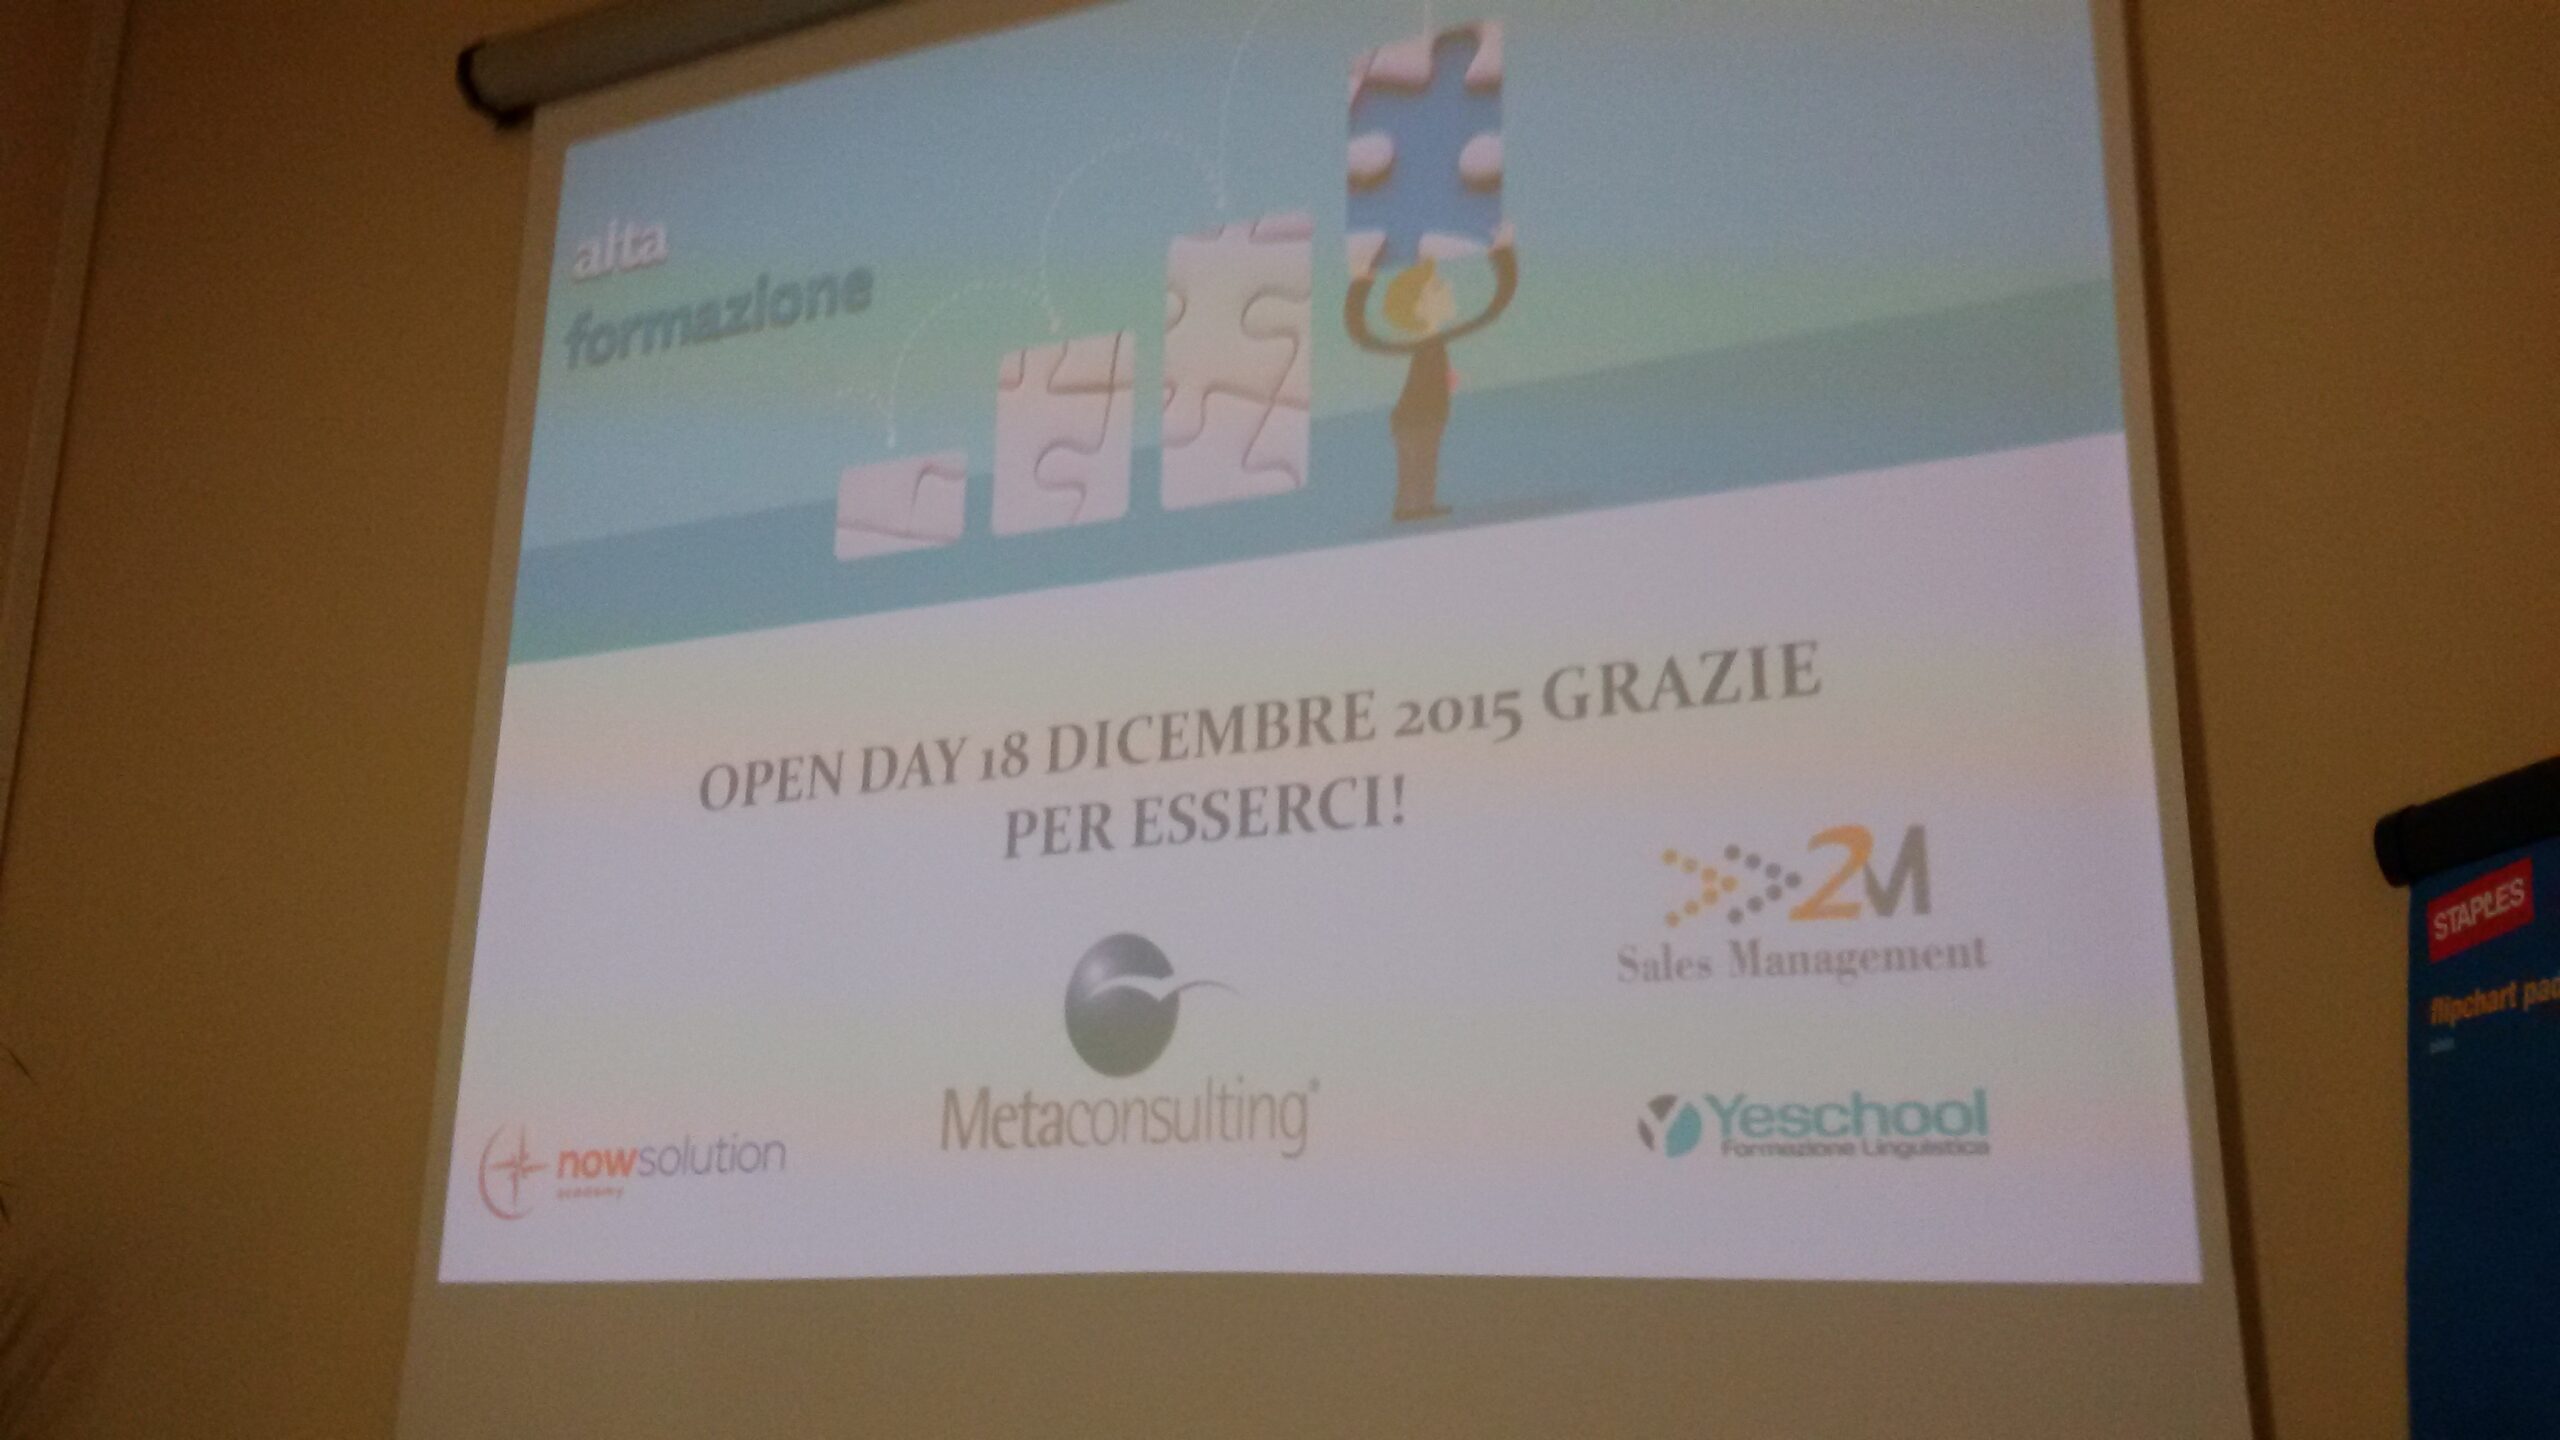 Open day Metaconsulting